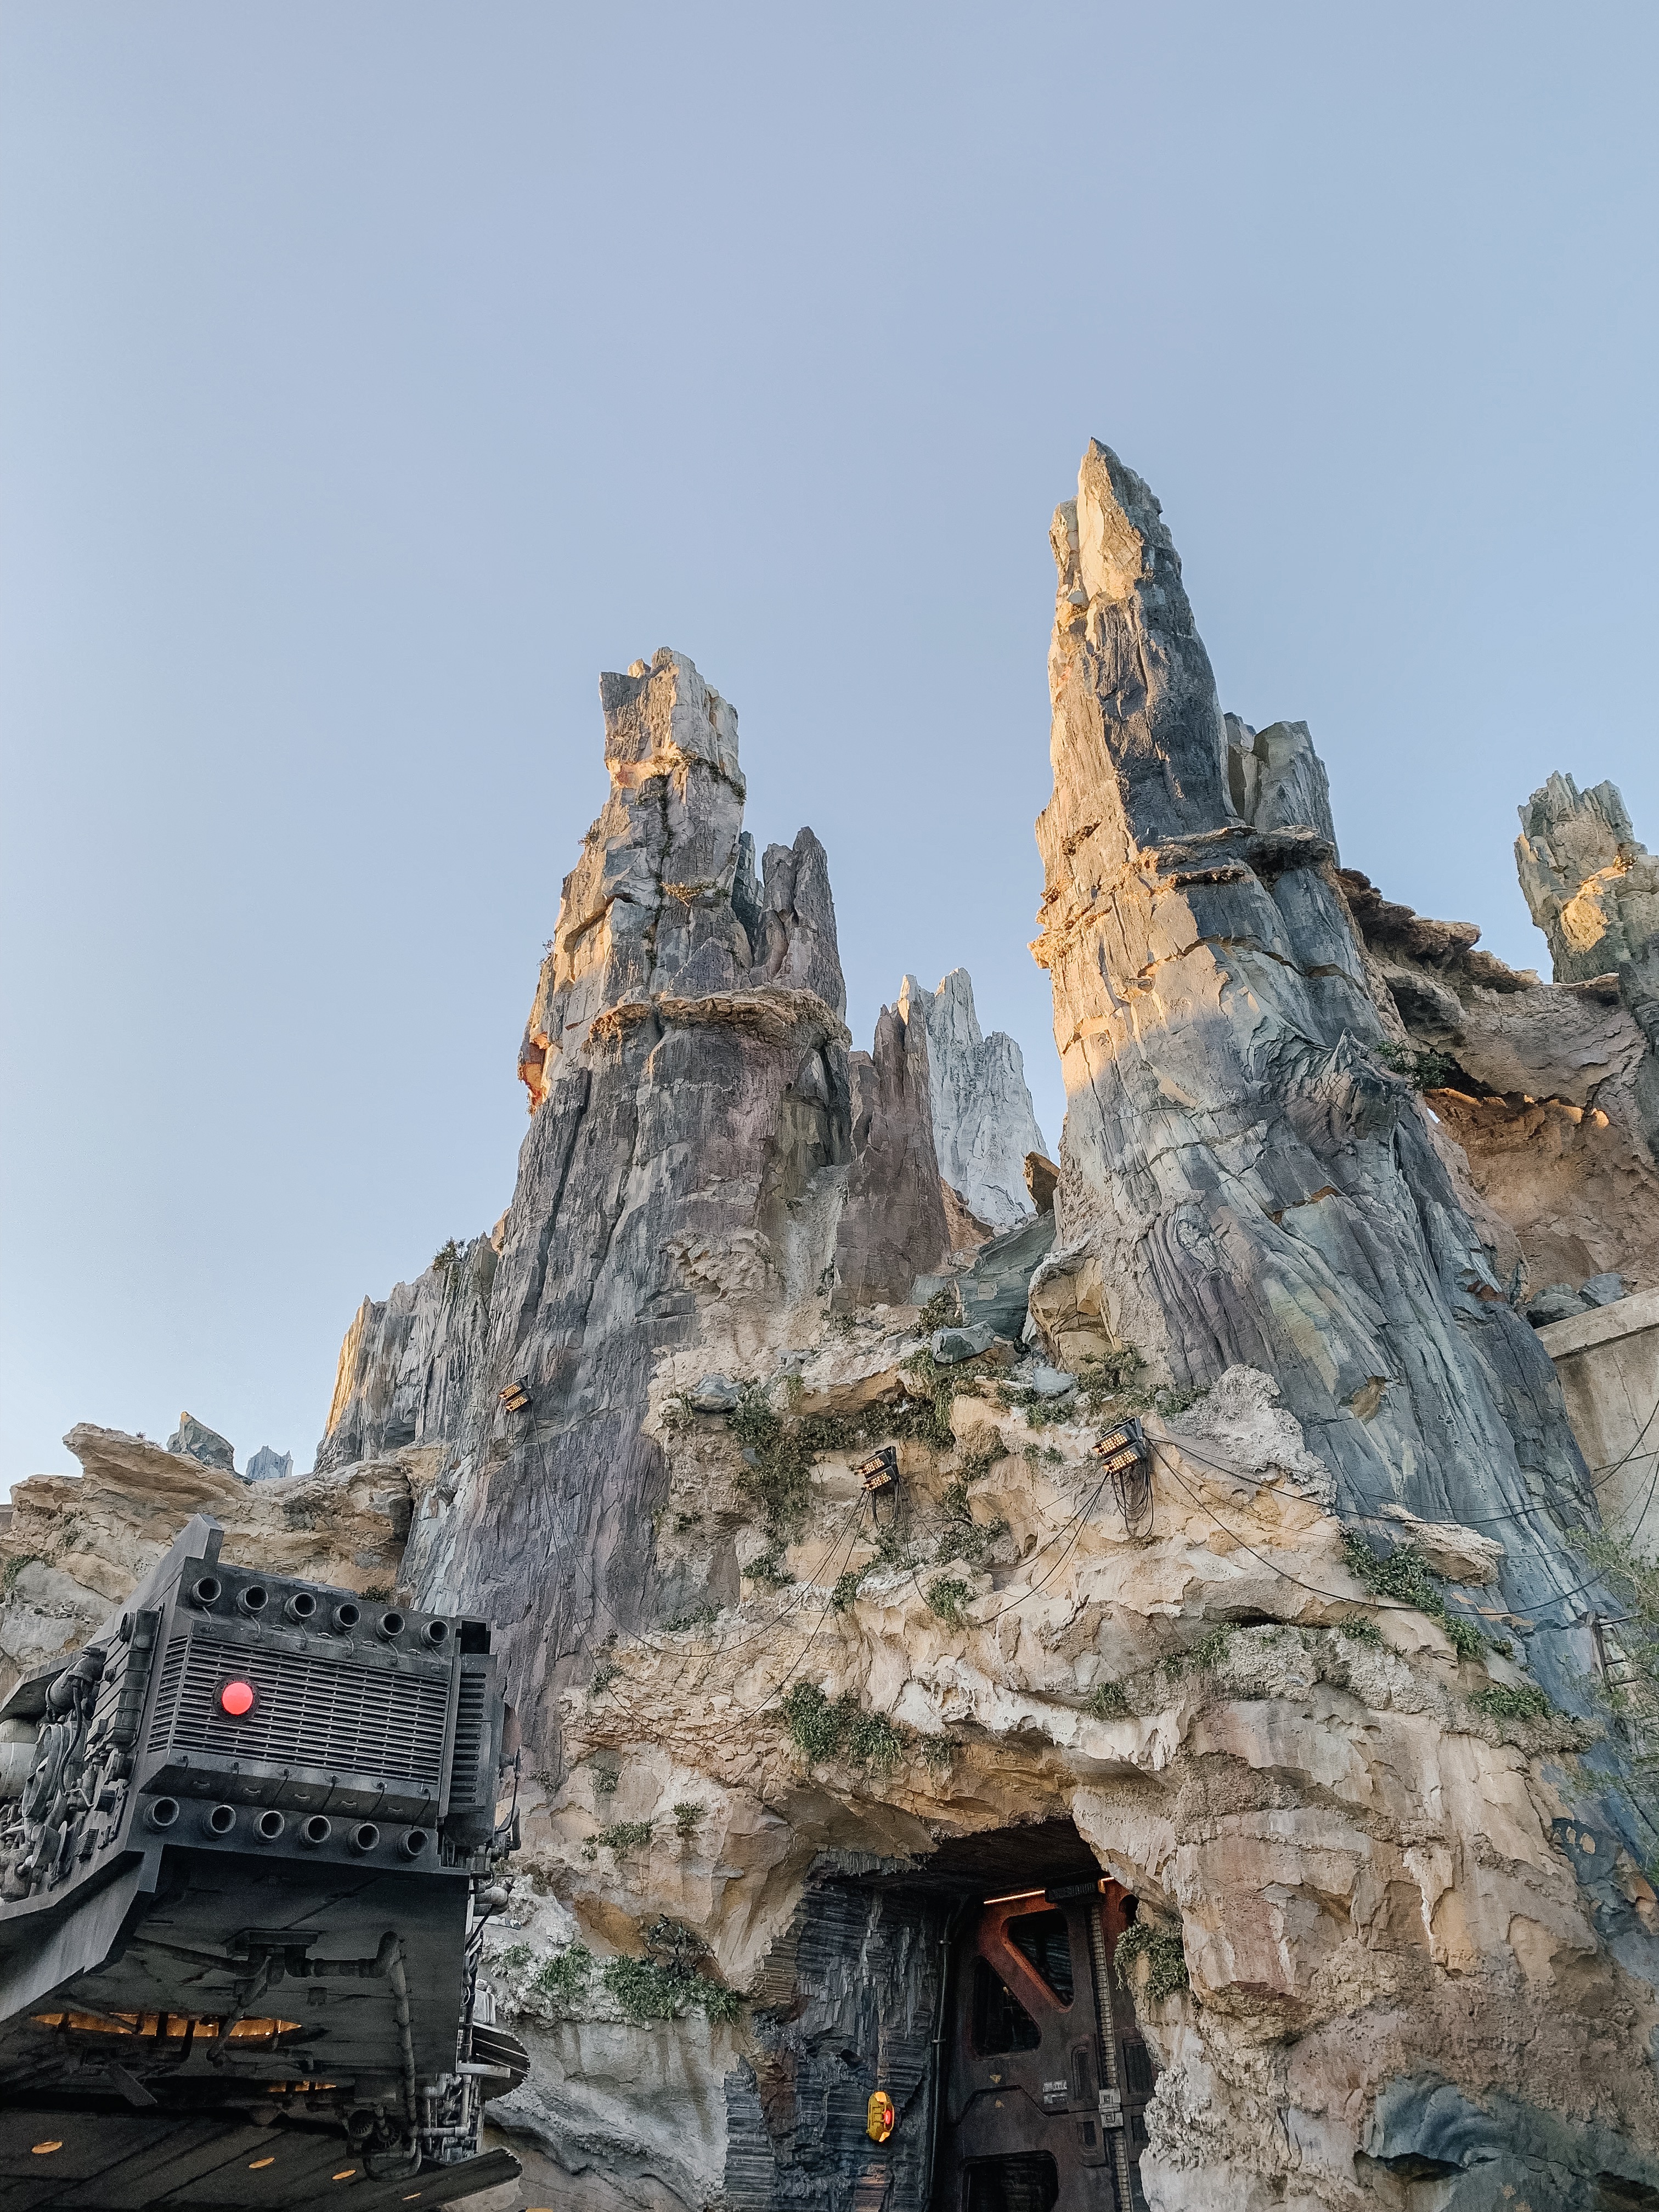 What to See and Do at Star Wars: Galaxy's Edge sparkleshinylove Mandy Furnis